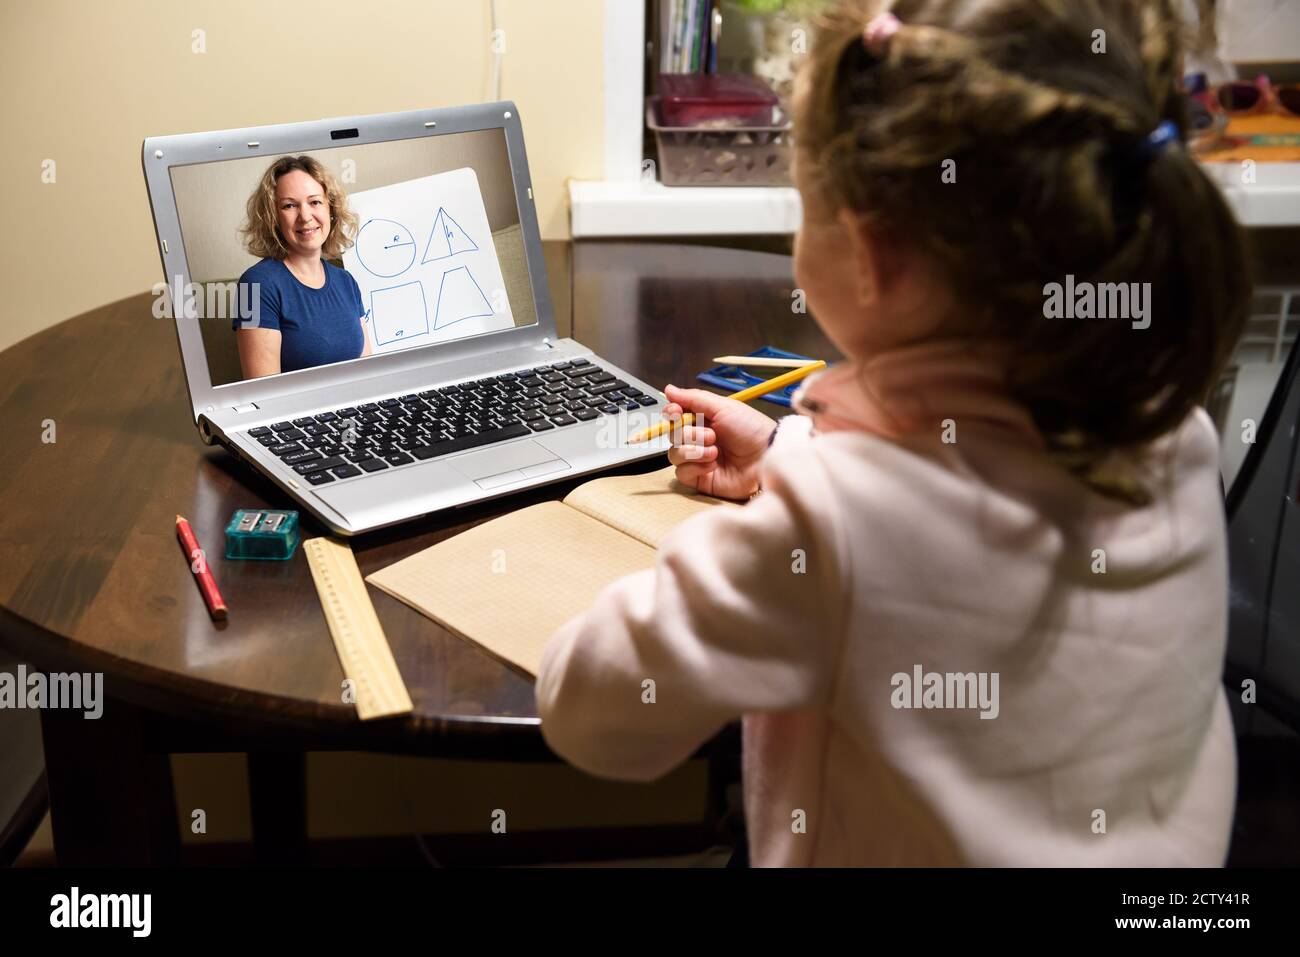 Online home education, tutor teaches preschool child during quarantine due to coronavirus. Kid learning with teacher by laptop. Concept of virtual dis Stock Photo